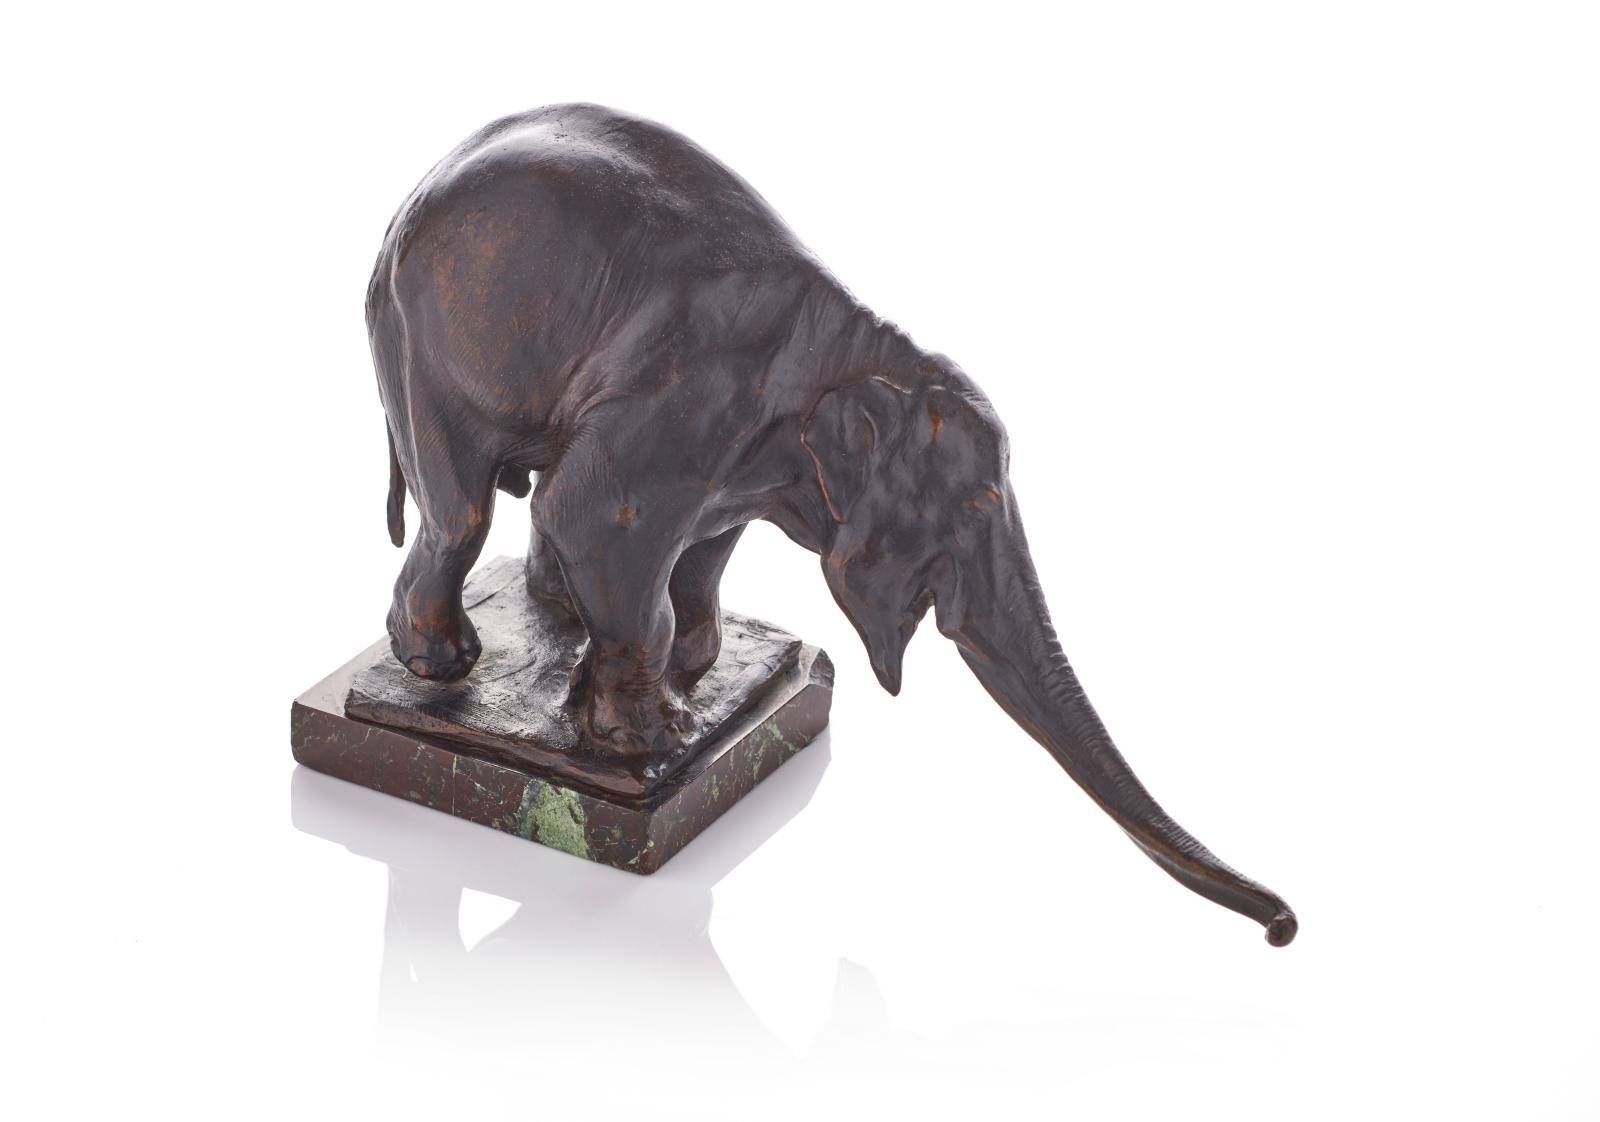 Rembrandt Bugatti (1884-1916) Éléphant d’Asie “il y arrivera" (Asian Elephant: “It’ll Get There”, c. 1907, bronze with a shaded brown patina, signed, founder's stamp " cire perdue A.A. Hebrard" on the terrace, h. 16 cm/6.3 in. with base. Estimate:€80,000/120,000